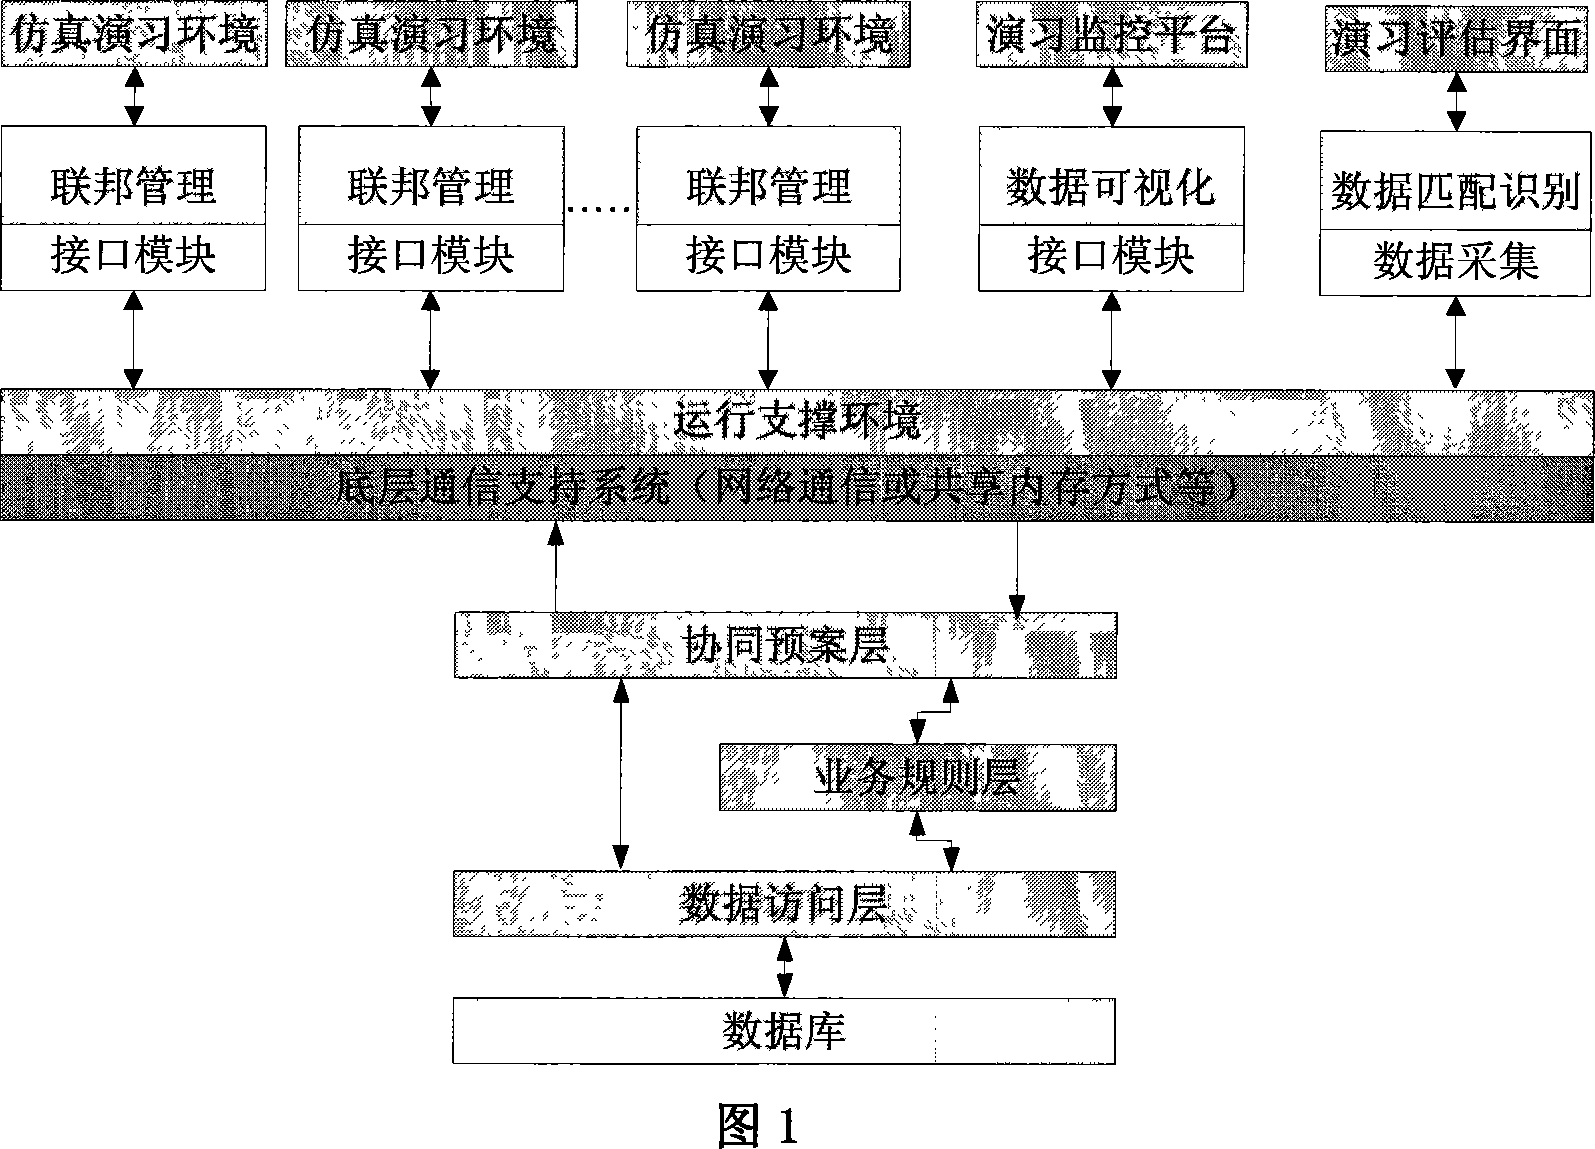 Multi-role distributed cooperating simulation drilling method